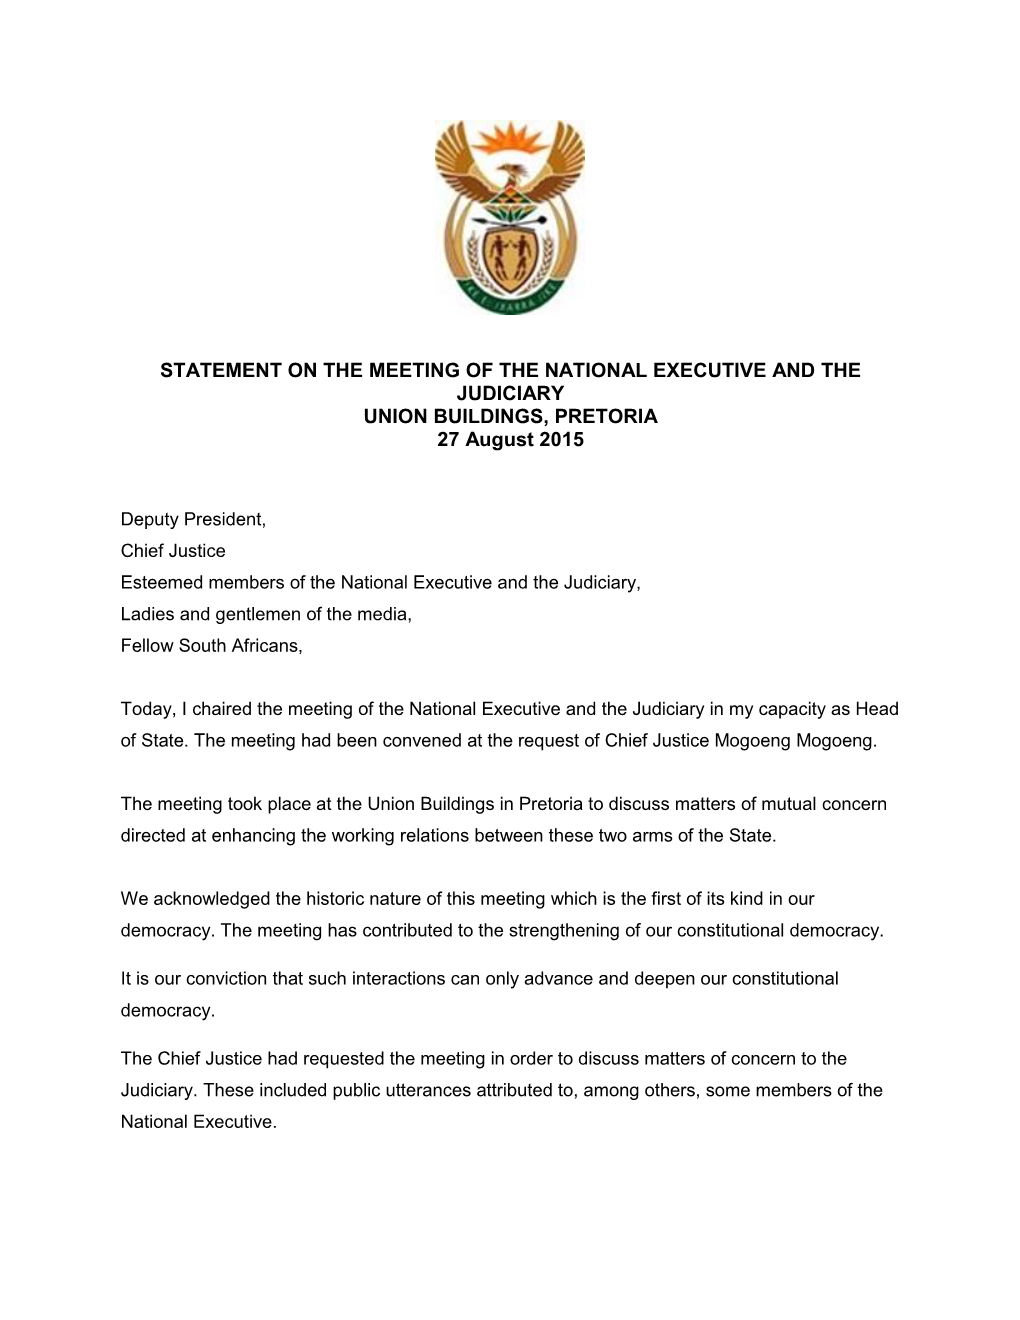 STATEMENT on the MEETING of the NATIONAL EXECUTIVE and the JUDICIARY UNION BUILDINGS, PRETORIA 27 August 2015